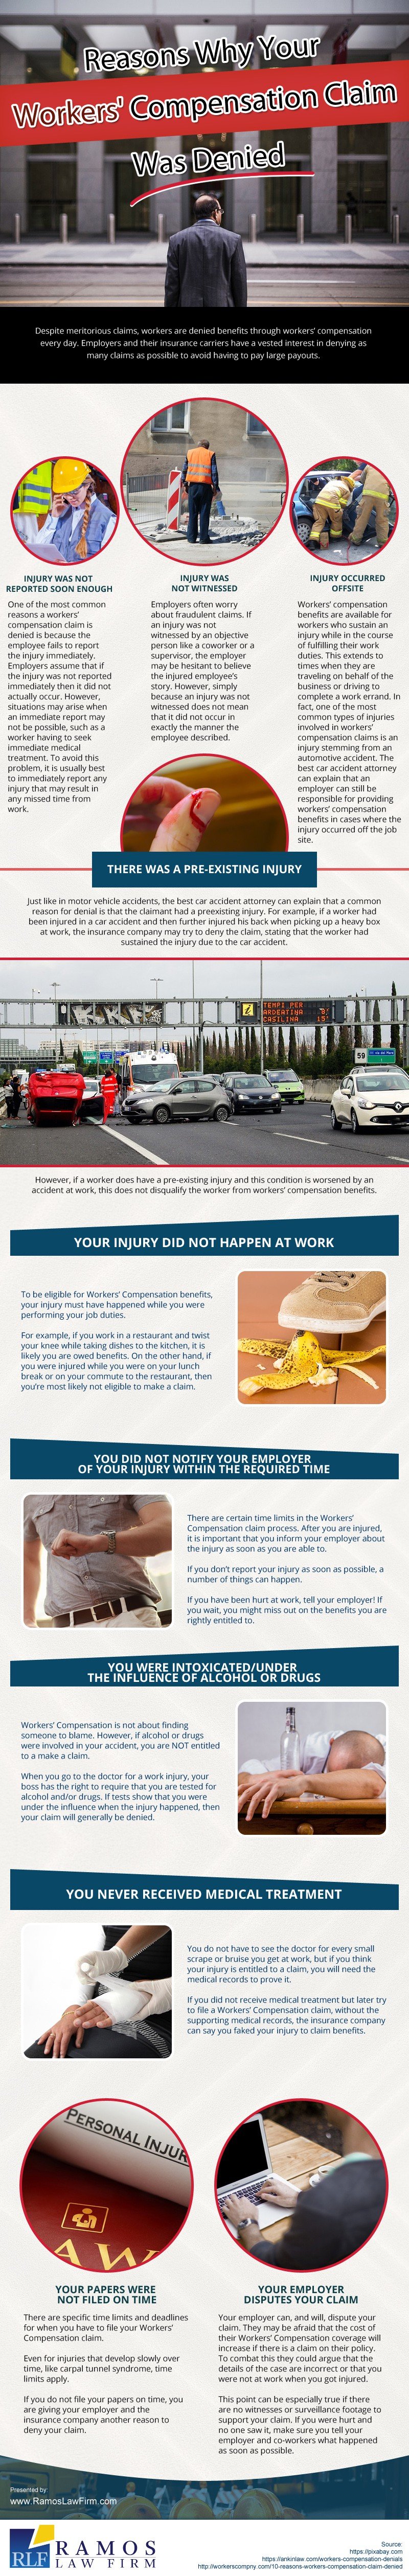 Reasons Why Your Workers' Compensation Claim Was Denied